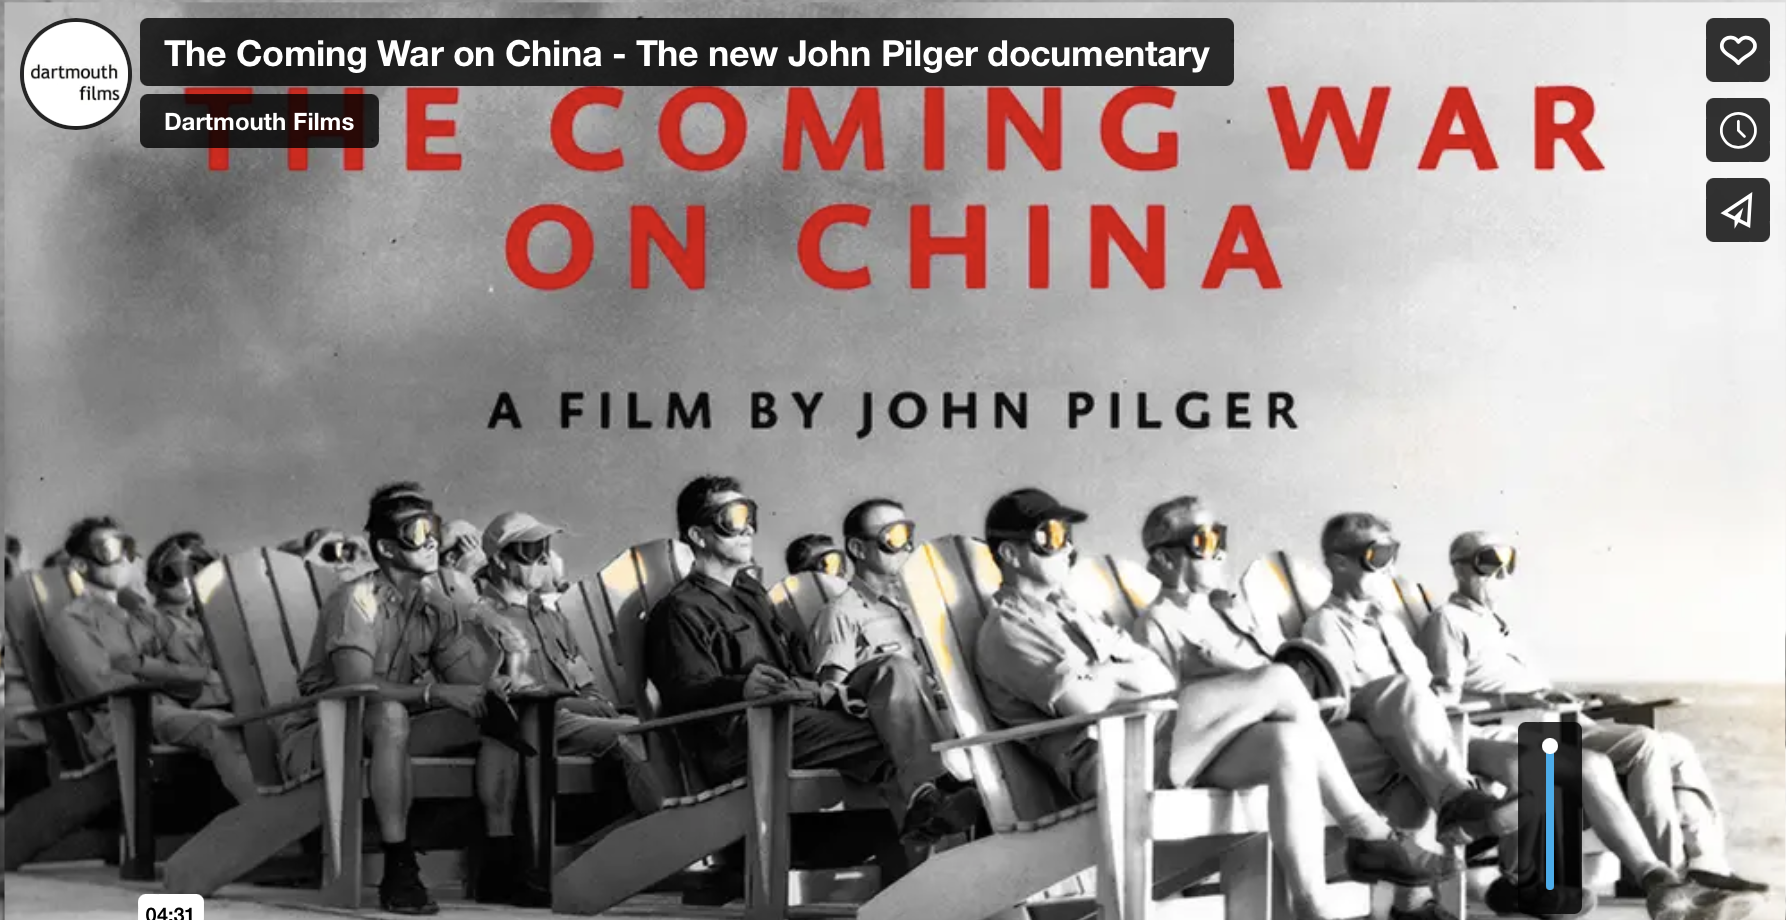 John Pilger: The US is Escalating War Tensions With China in Desperate Bid to Maintain Global Power